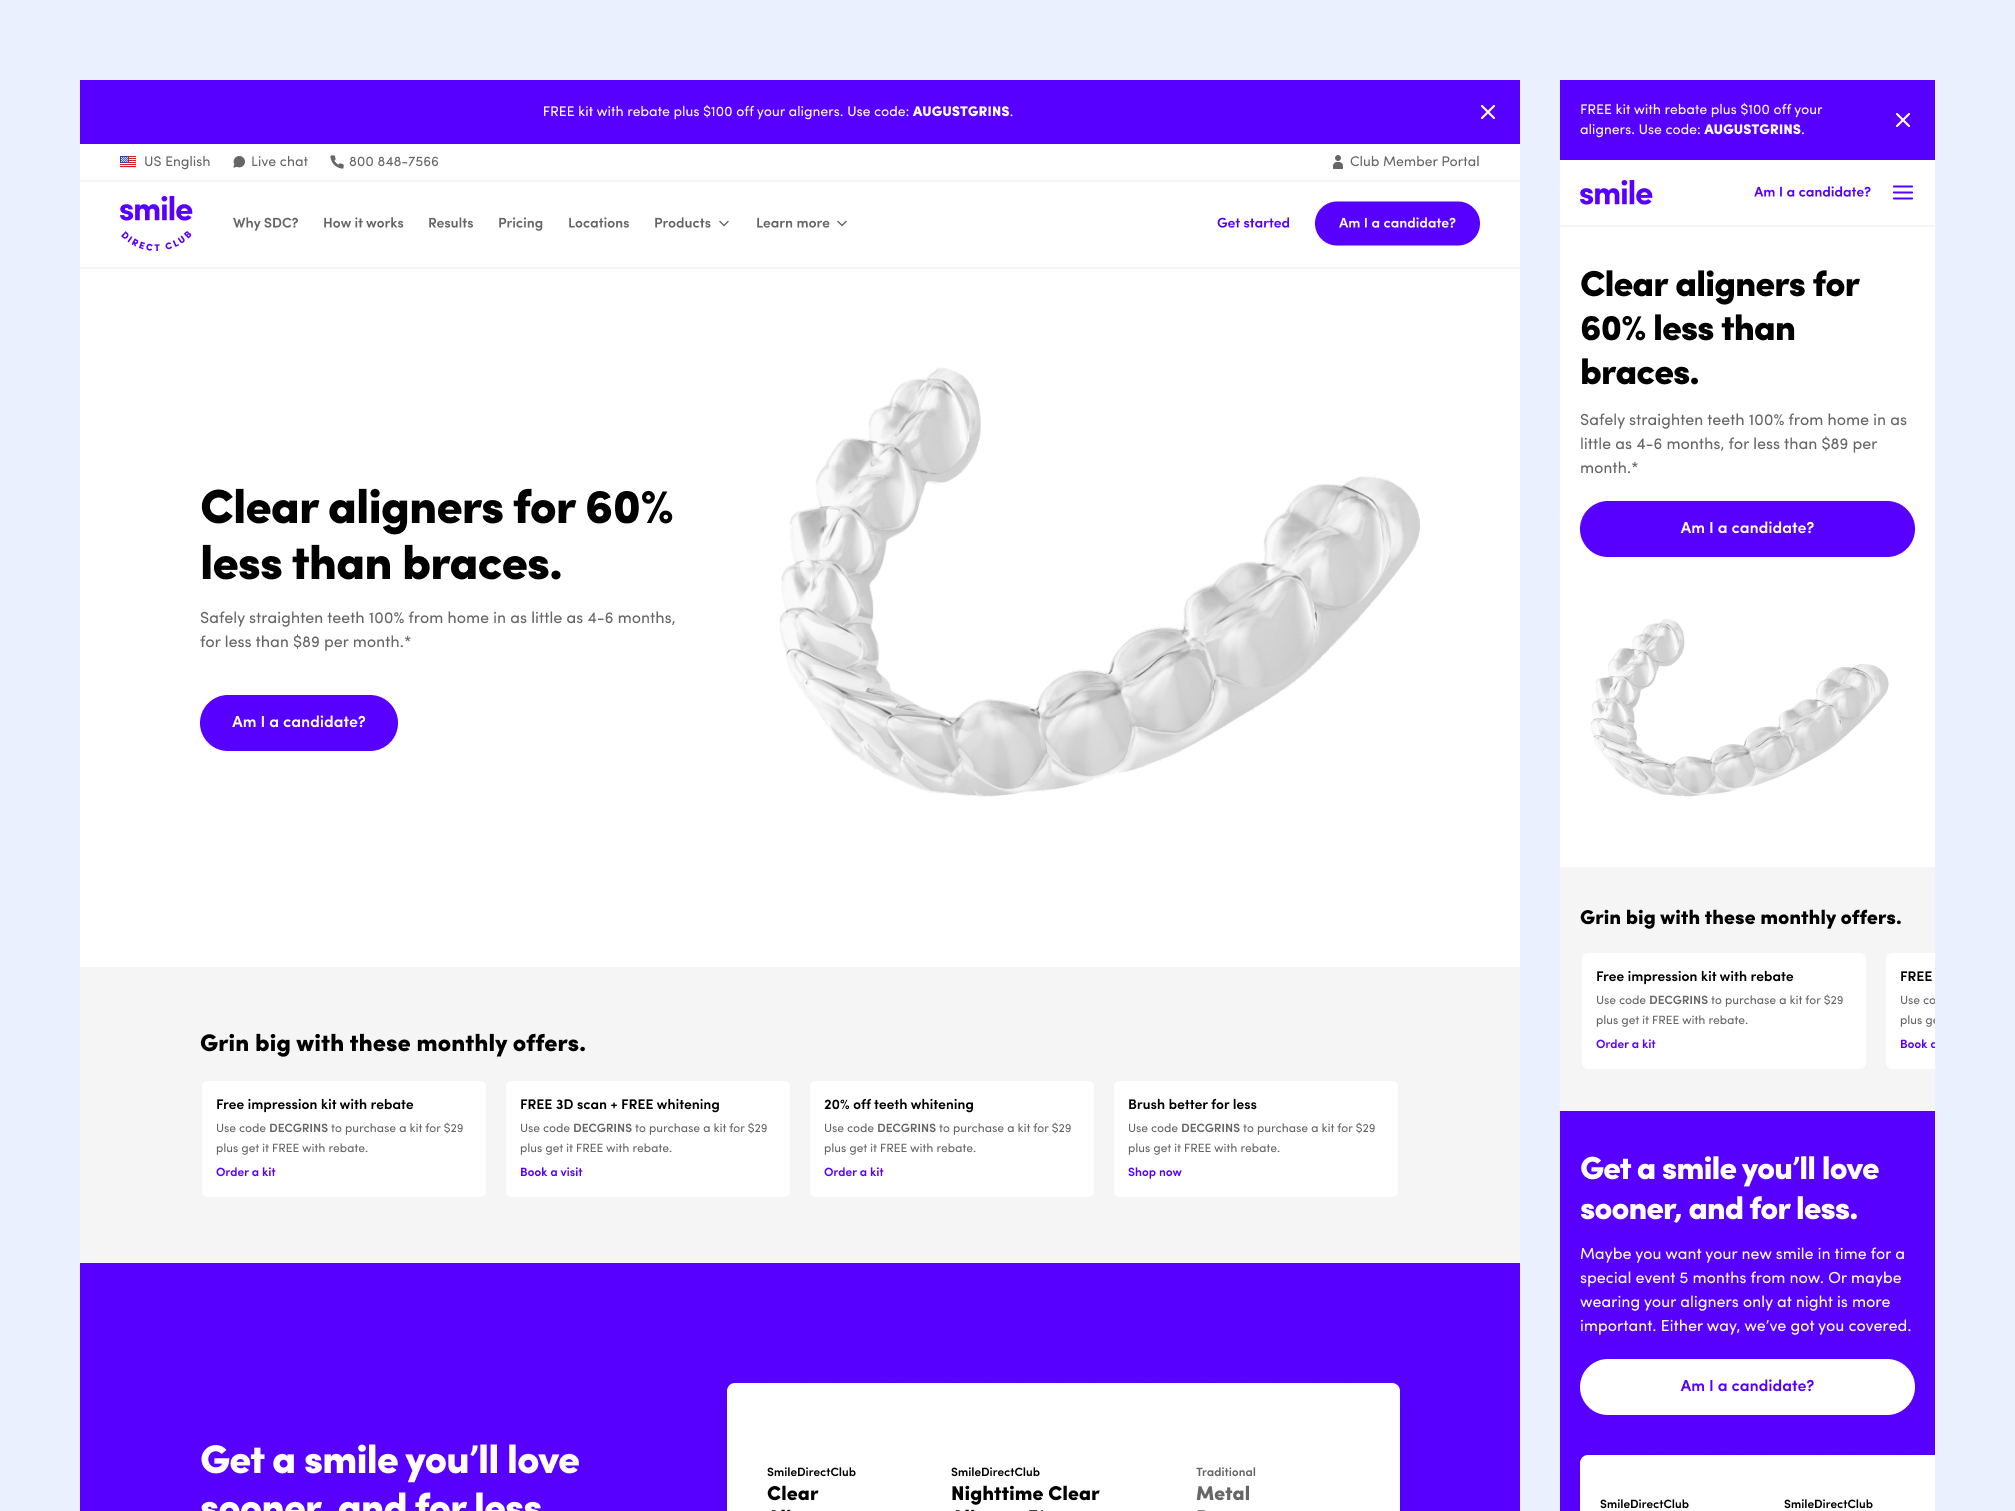 A screen from the website Figma file that assembles customized web components and sections into page layouts to accomplish business and user goals